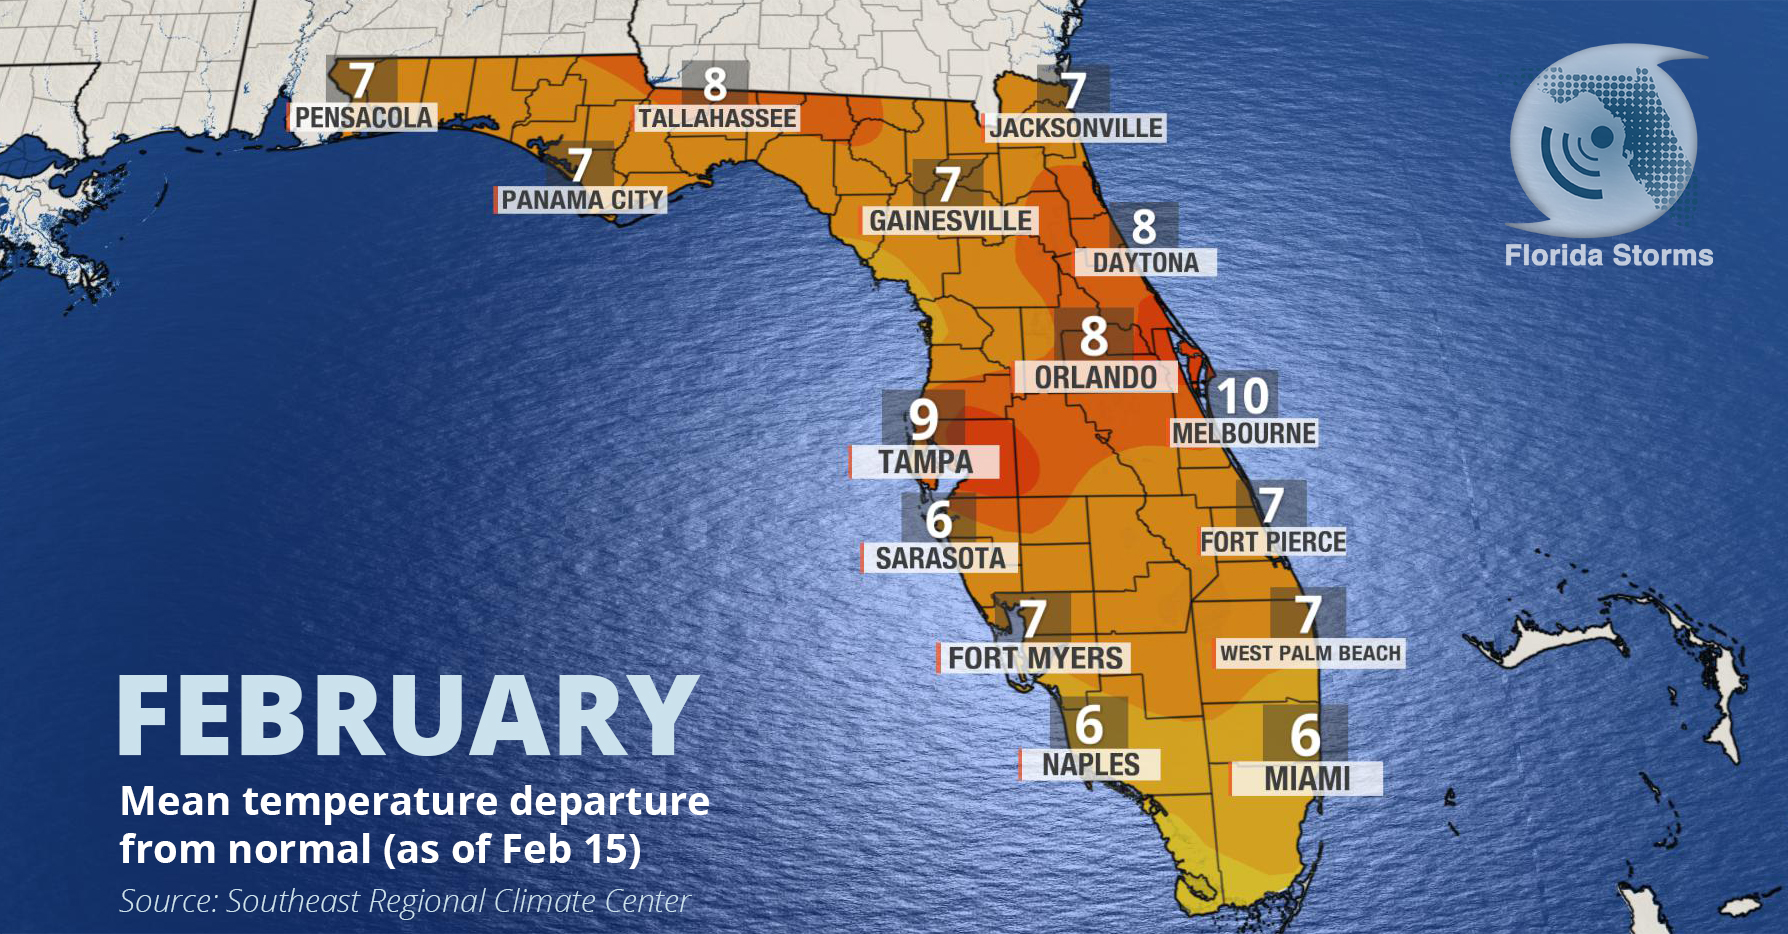 February Flip in Florida Fends Off Freezing January Florida Storms